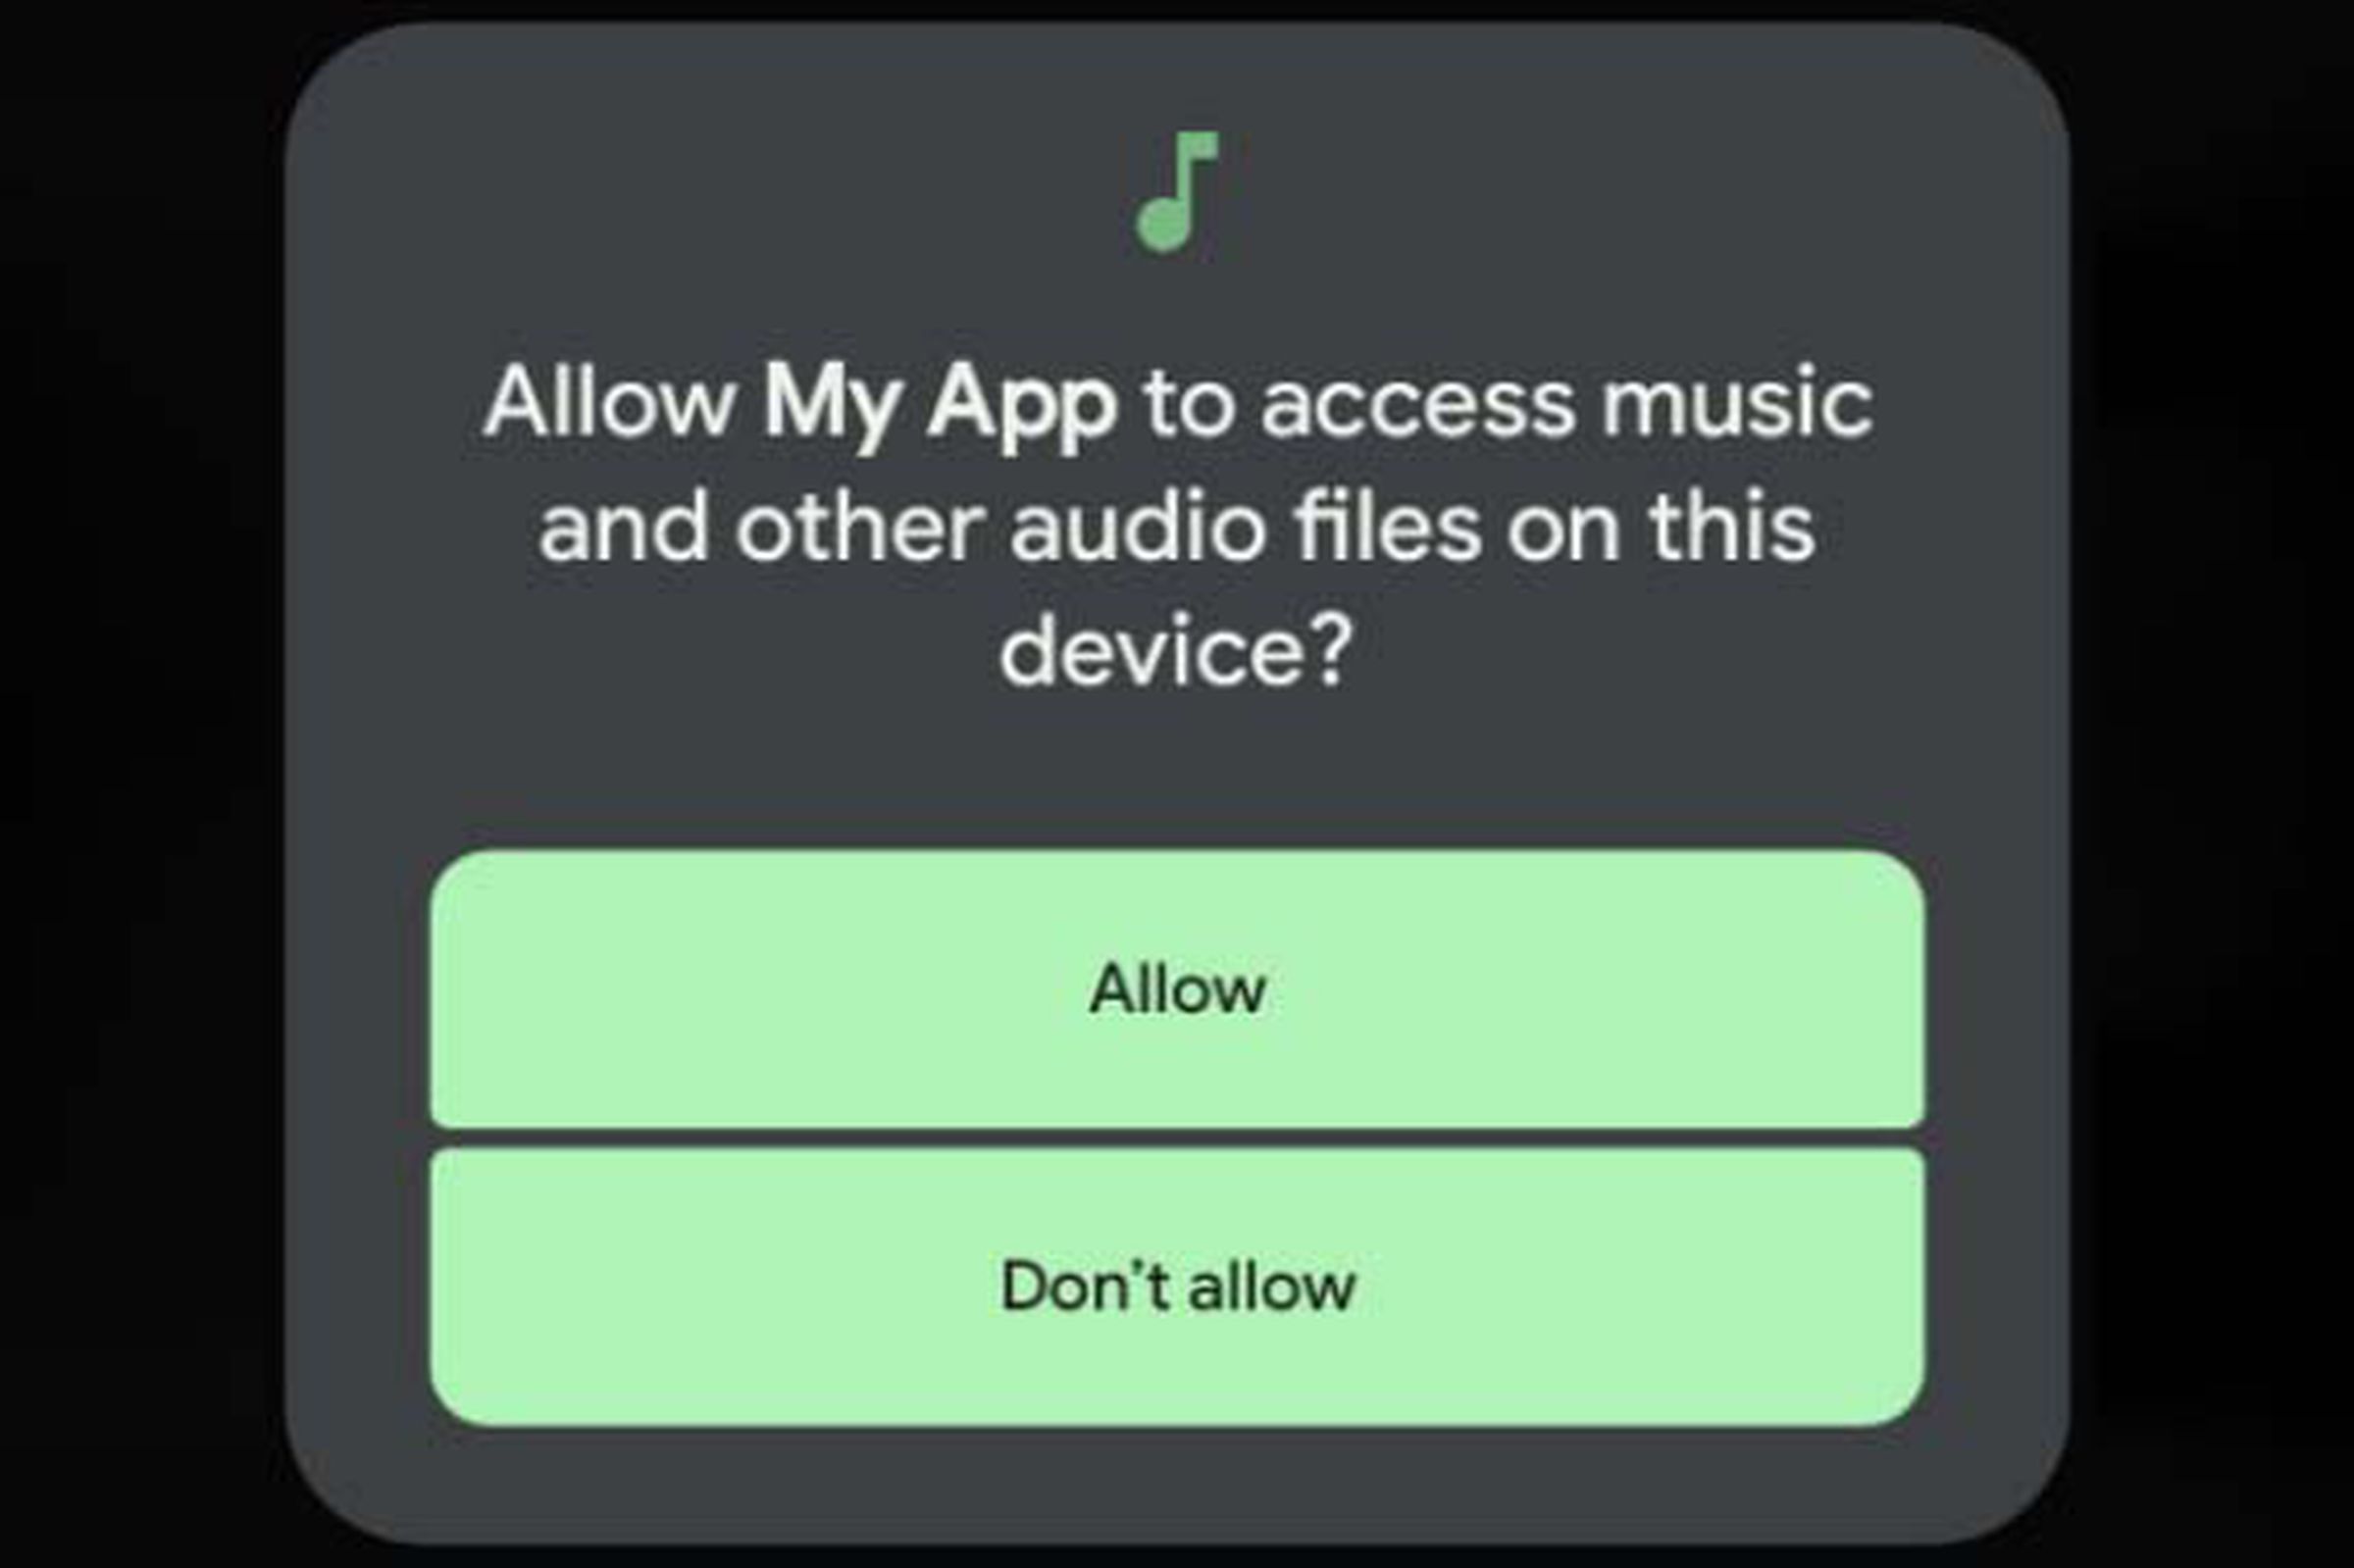 Apps will need to ask for permission to access specific filetypes.